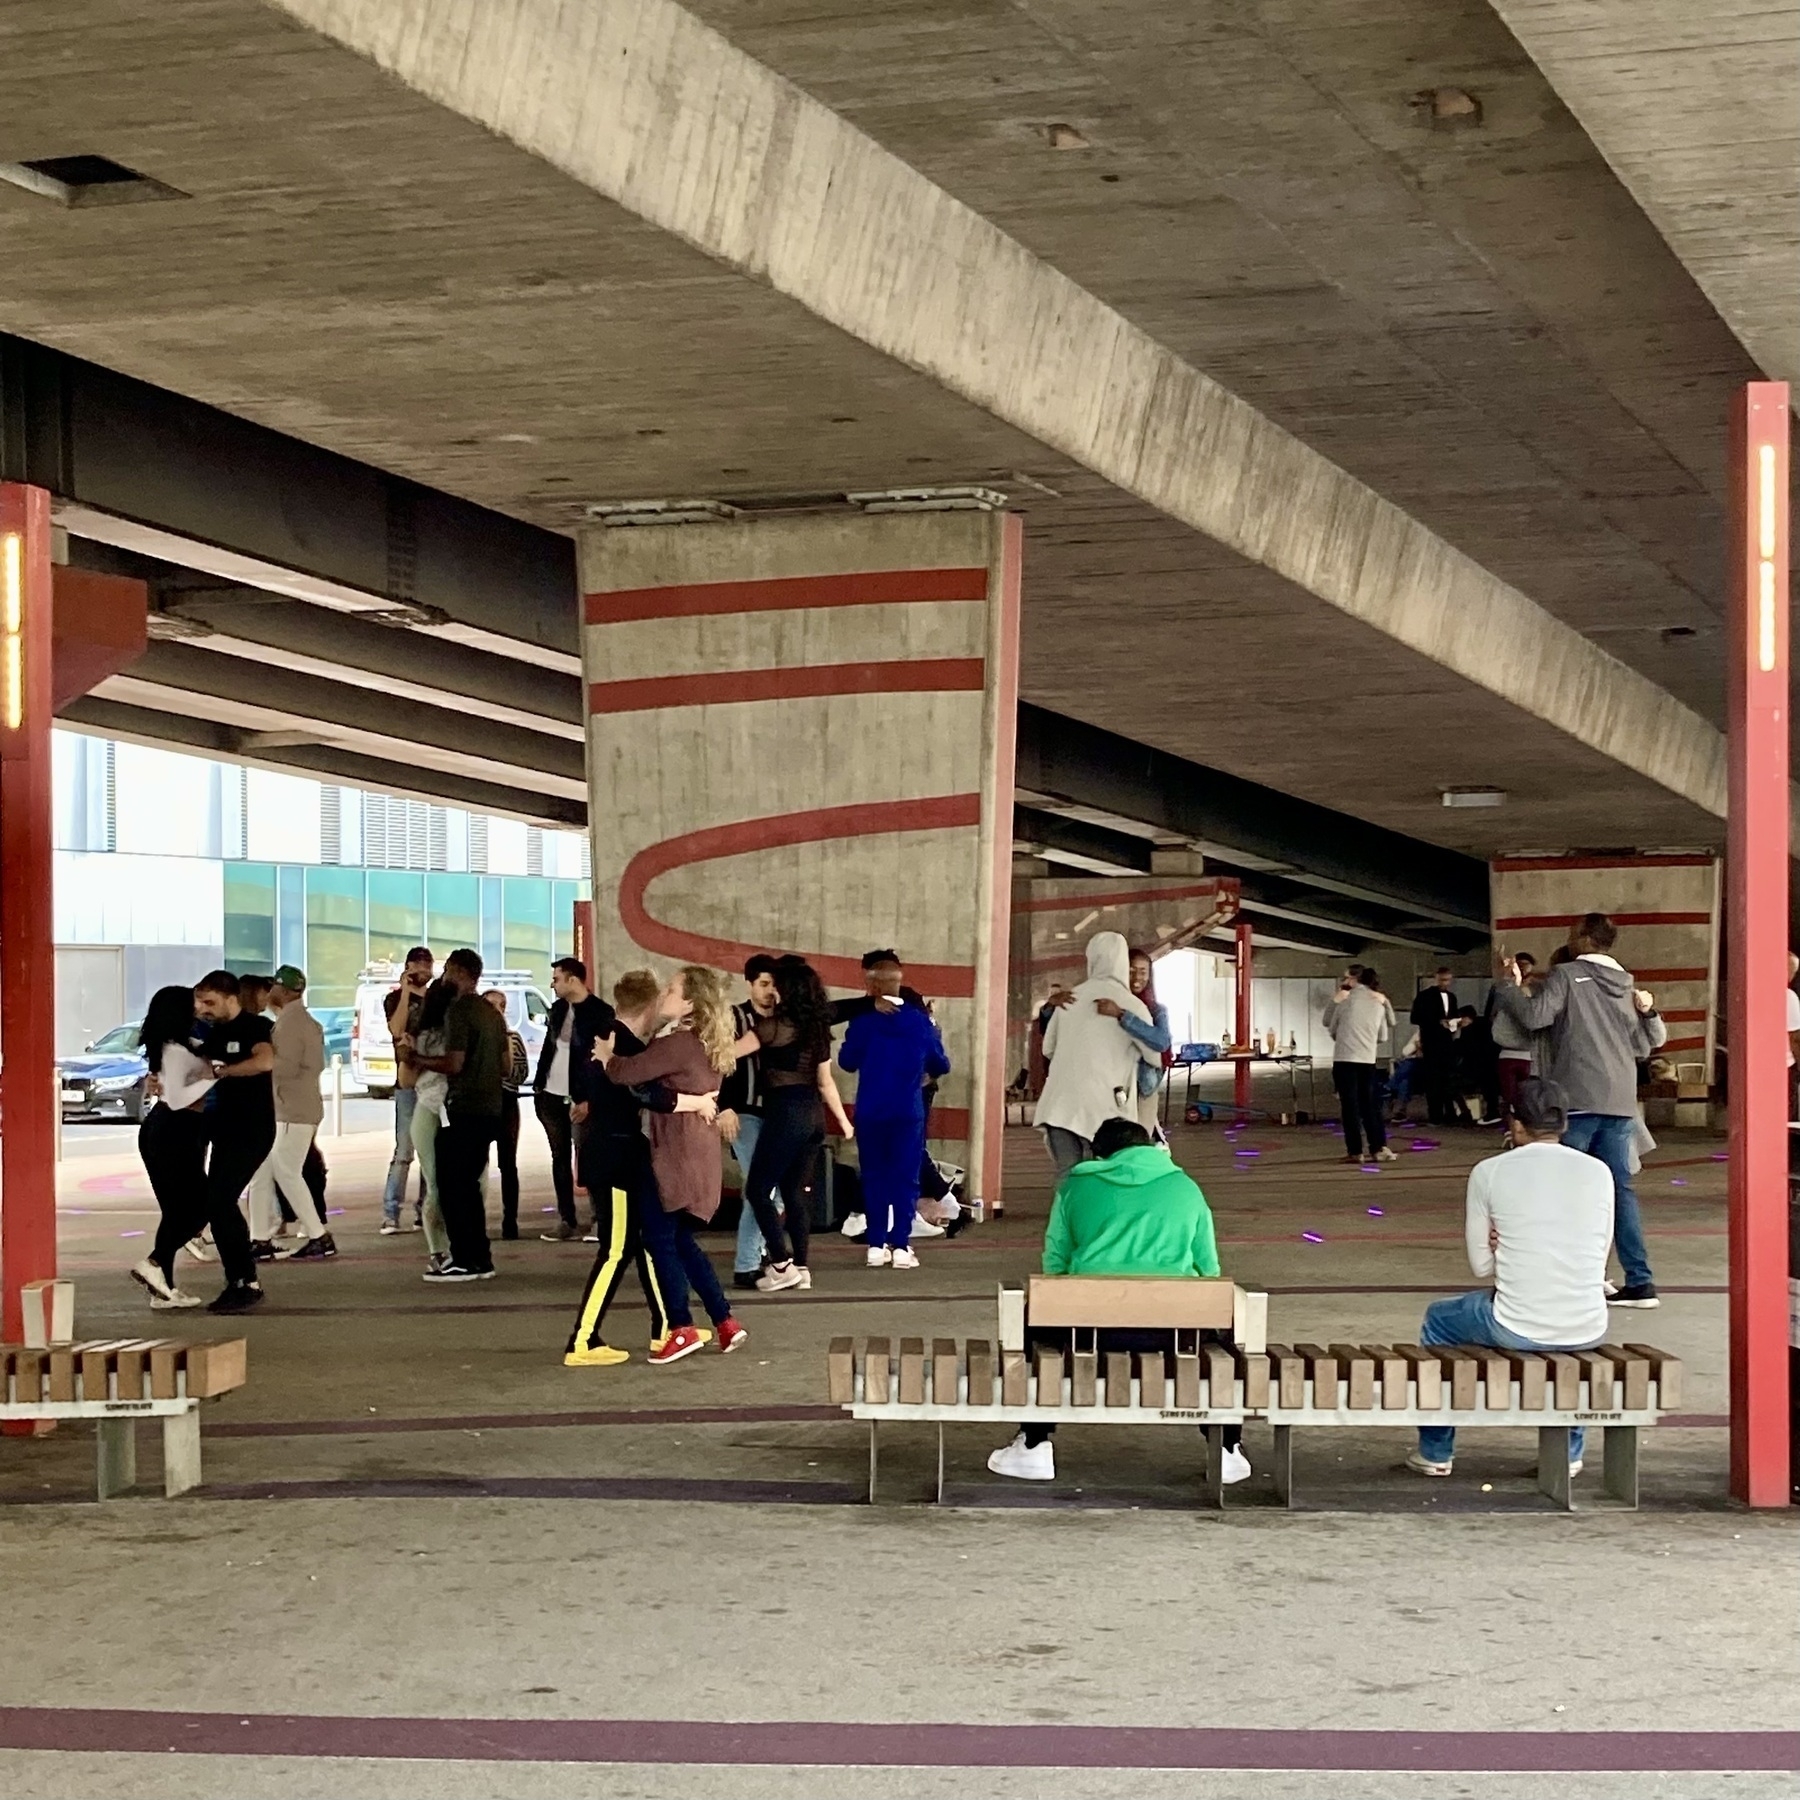 Couples dance together under a concrete flyover, decorated with red swooshes, people sitting on benches look on. Terry Spinks Place, Canning Town, East London